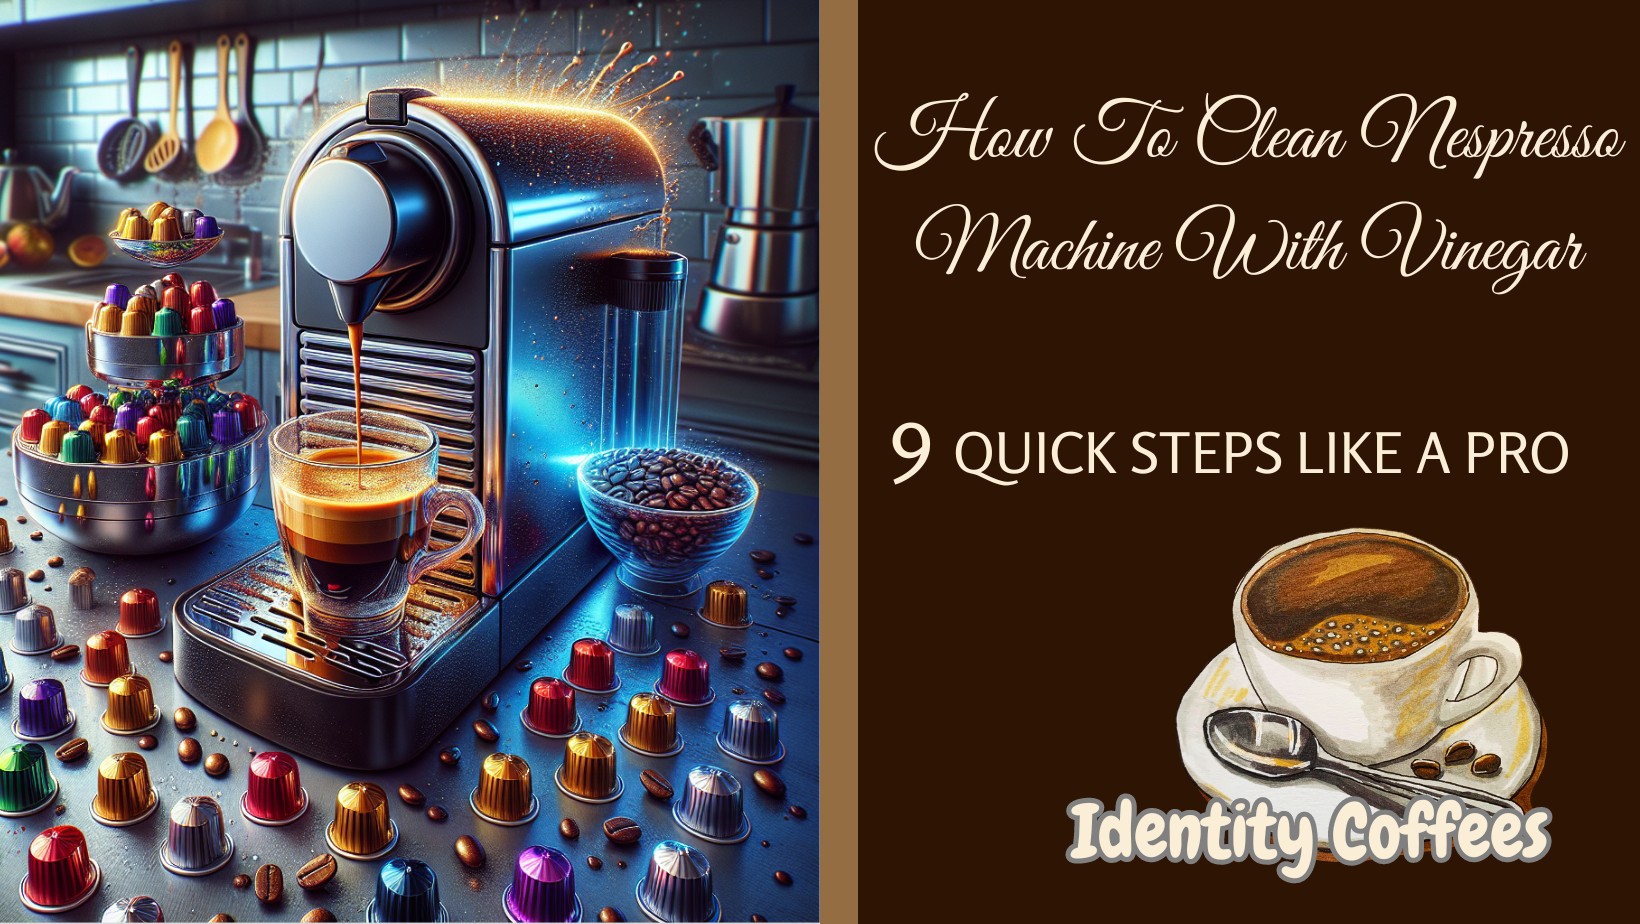 How To Clean Nespresso Machine With Vinegar in 9 Quick Steps like a Pro